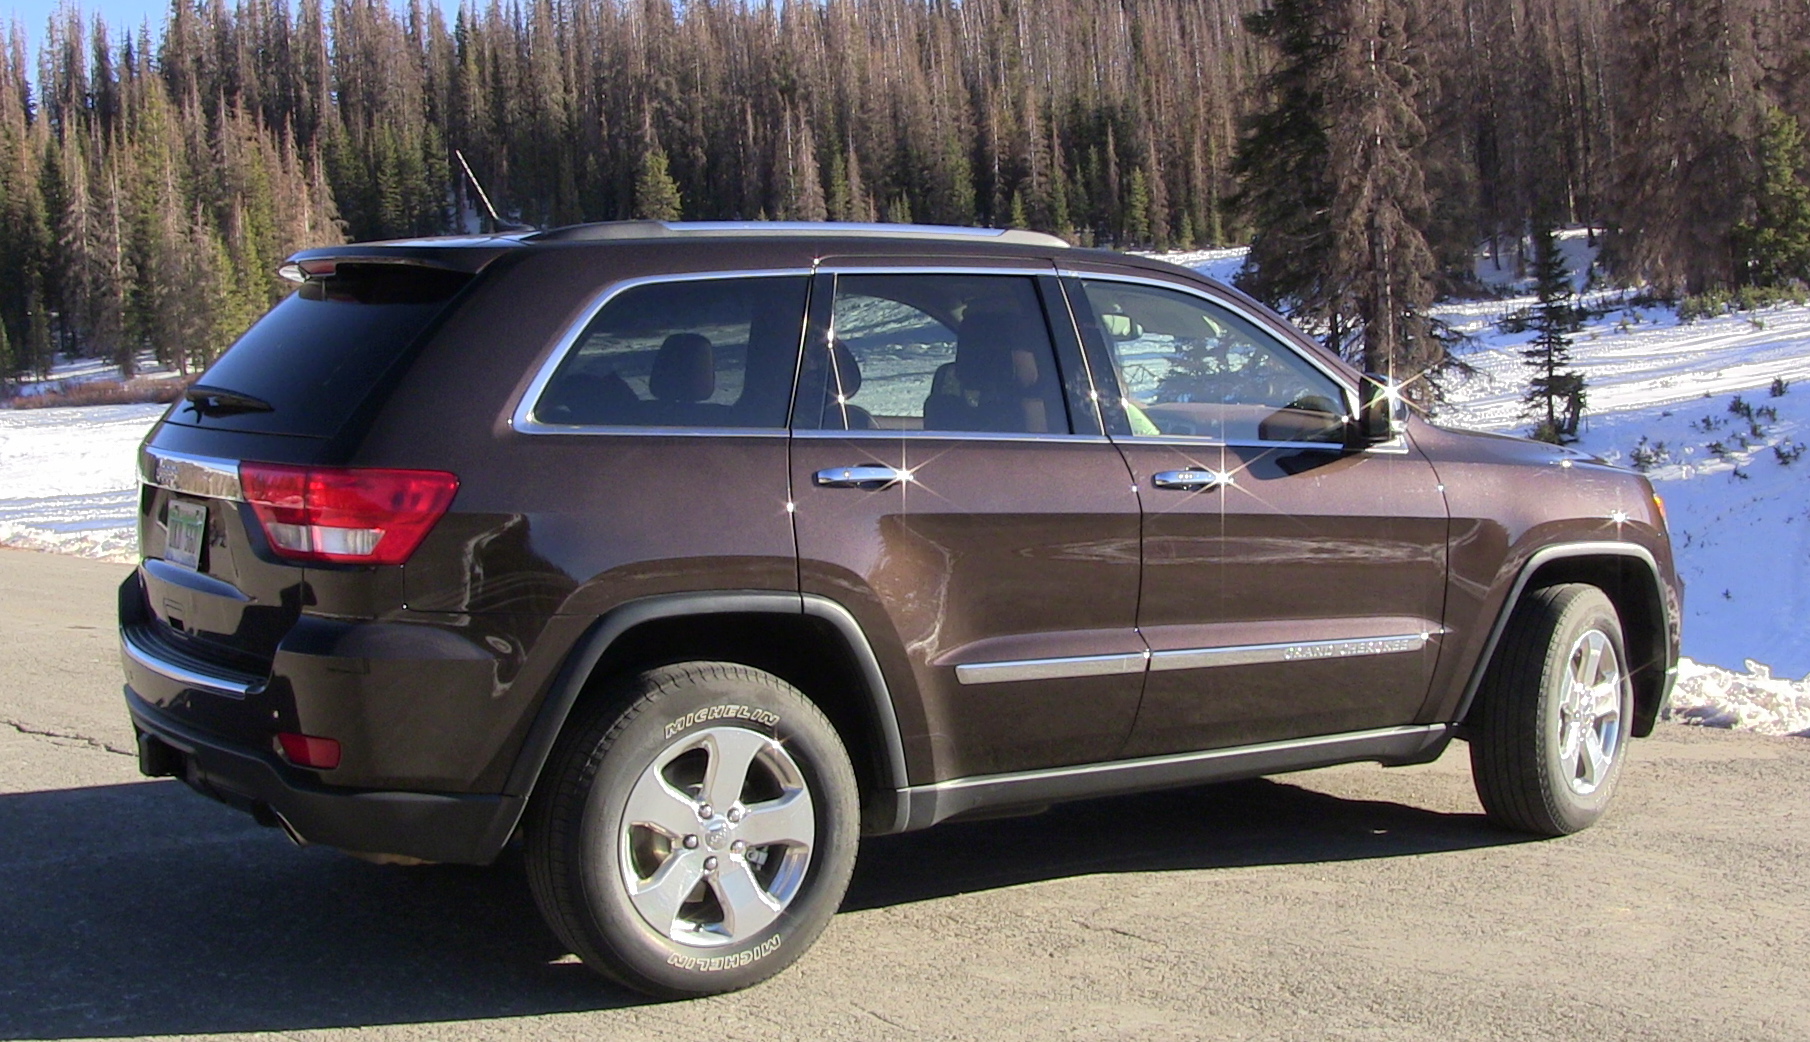 Review: 2012 Jeep Grand Cherokee goes on Holiday Road Trip | TFLCar.com